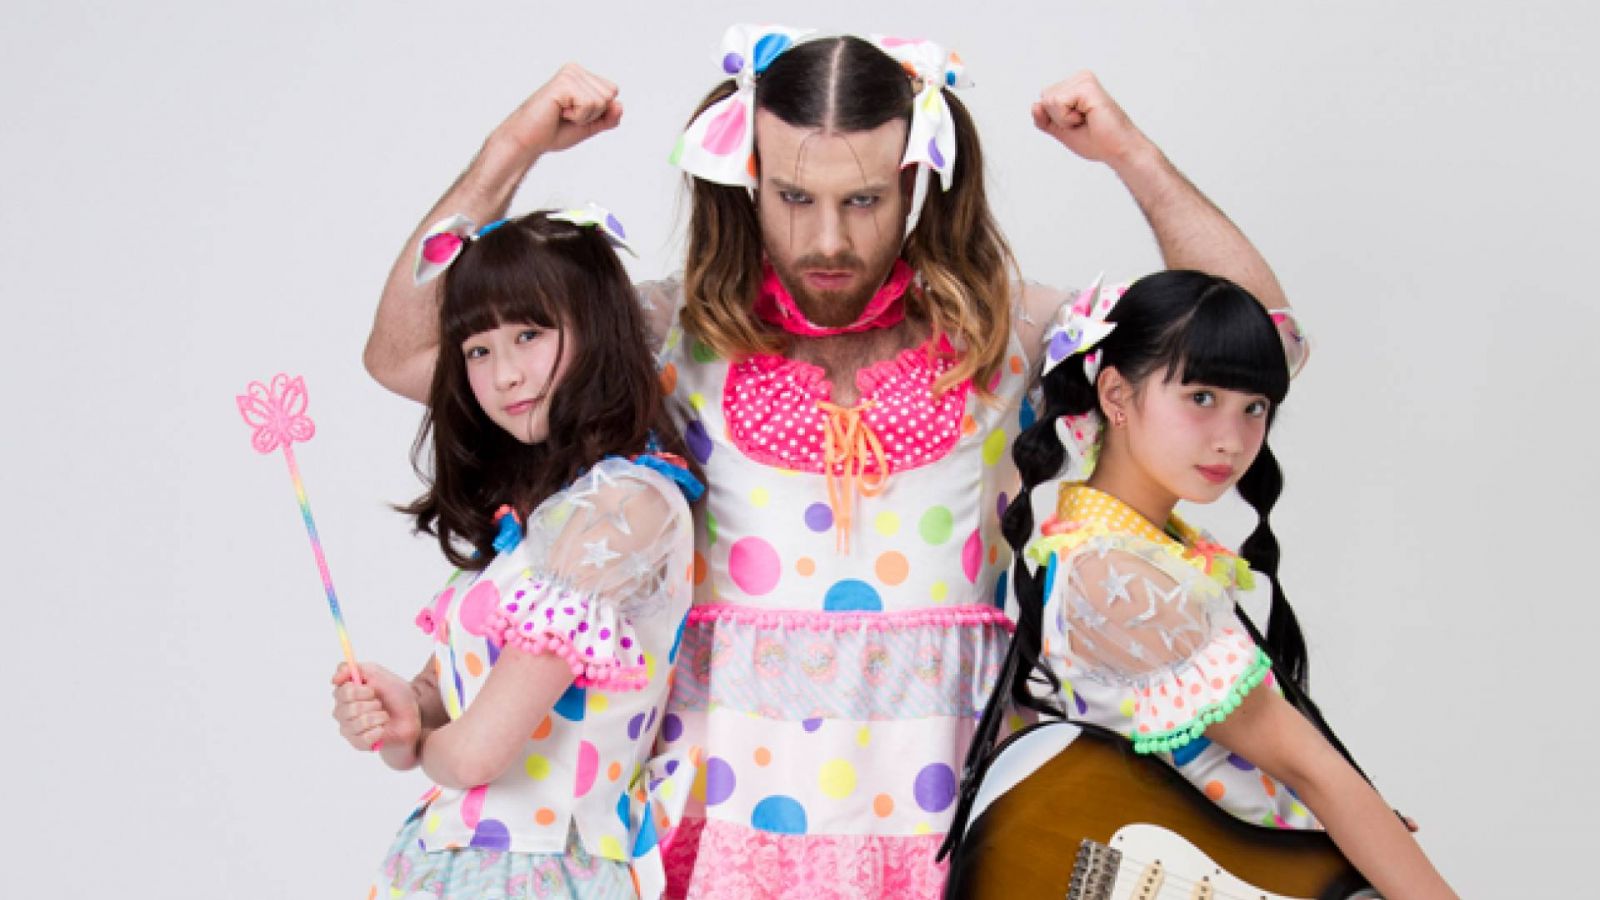 Ladybeard deja LADYBABY © 2015 clearstone Co., Ltd. All rights reserved.